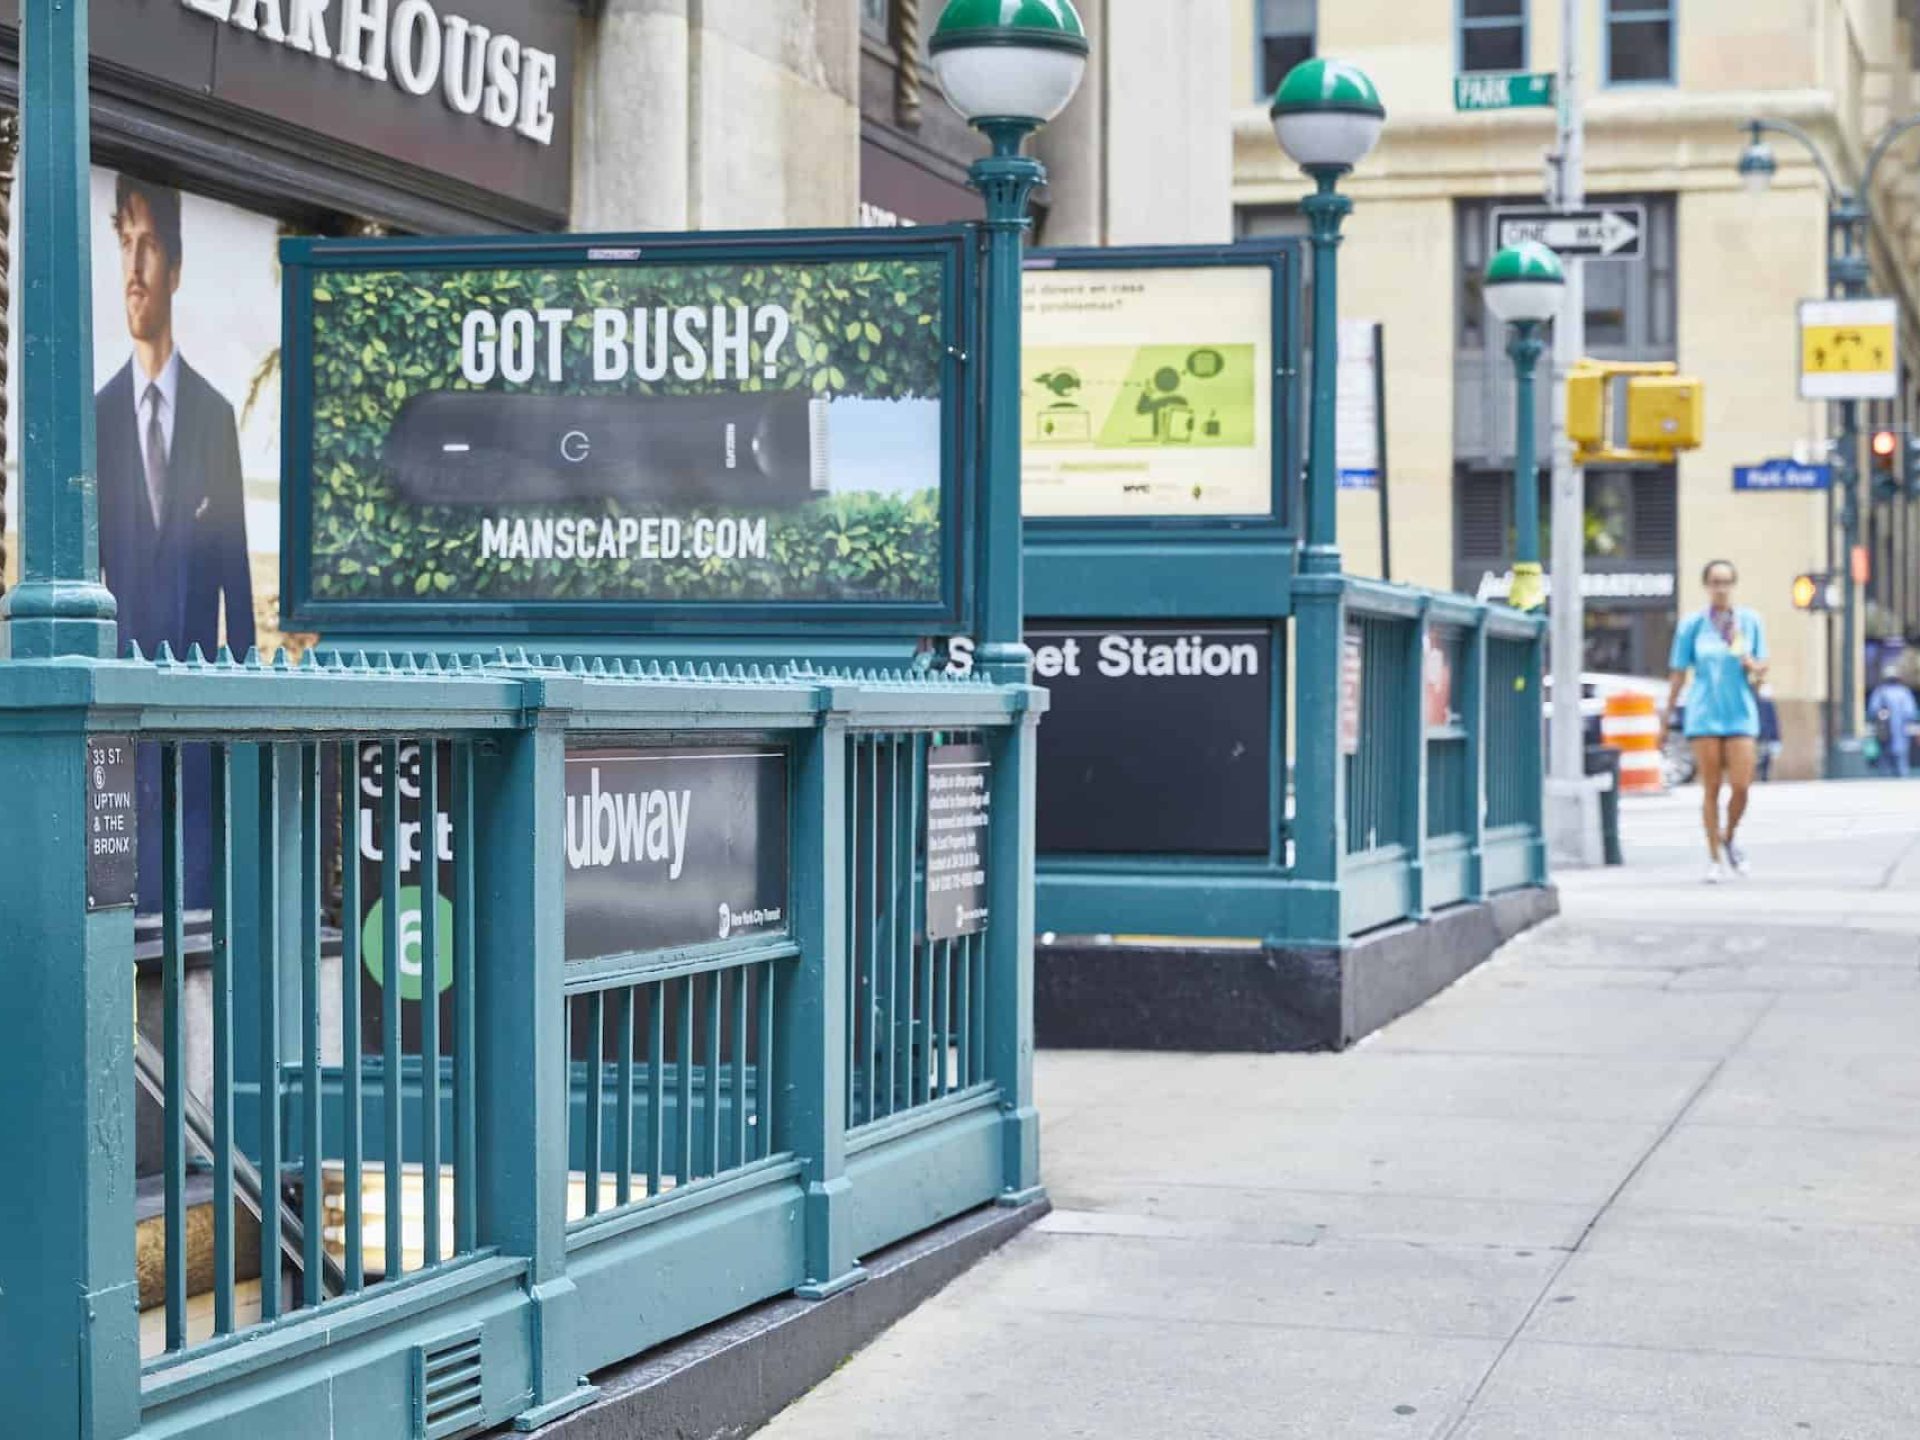 Sidewalk view of the 33rd Street subway entrance in New York. Green railings with subway sign and advertising billboards.